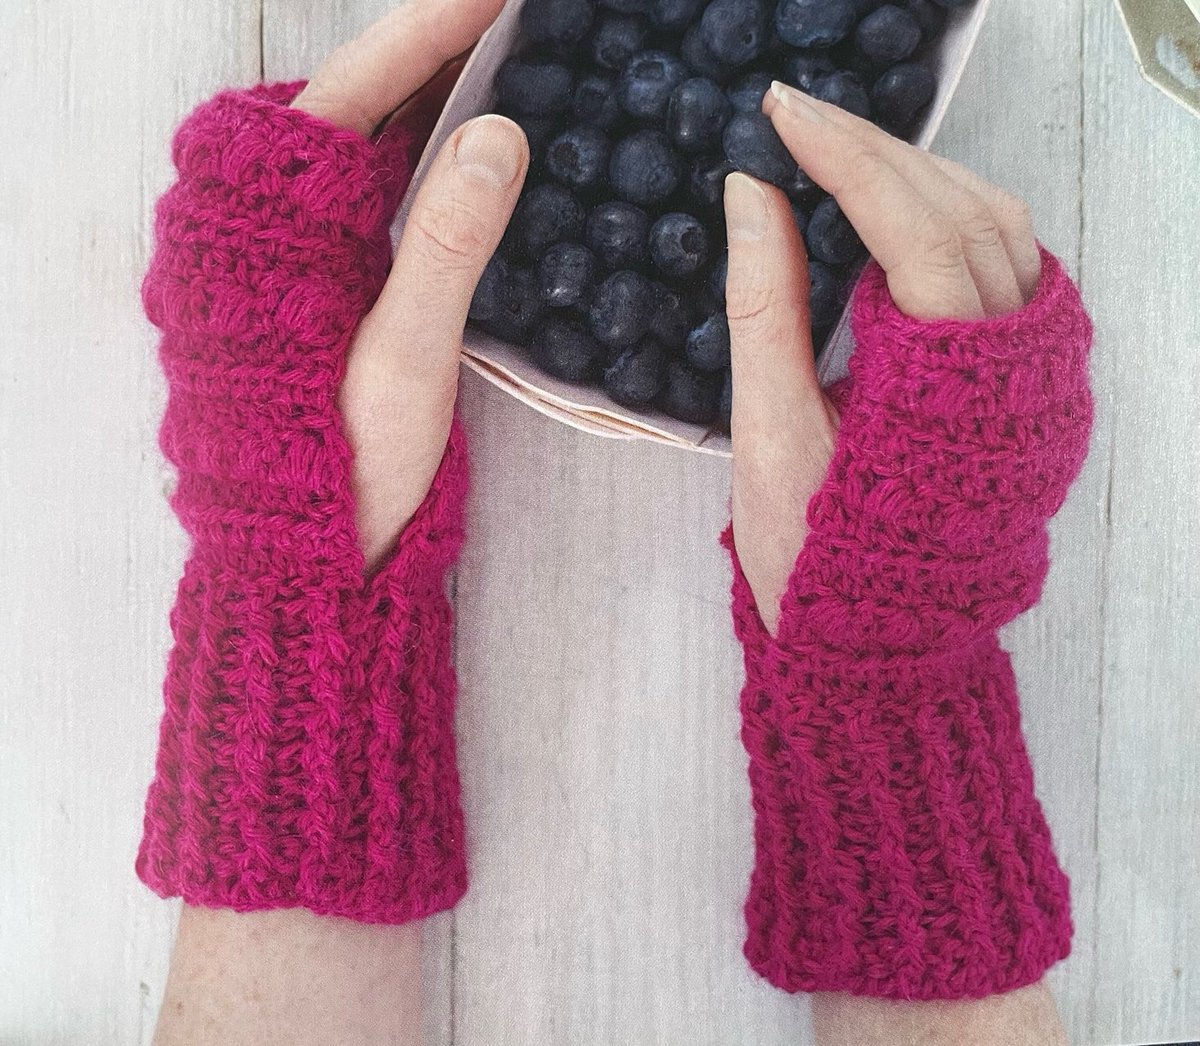 Excited to share the latest addition to my shop: Crochet Wrist Warmers Fingerless Mittens Pattern #crochet #sewing #crochetpattern #crochetmittens #fingerlessmitts #wristwarmers #MHHSBD #ad #wip #crochetfingerless #crochetgloves #yarn etsy.me/3HoDxaq